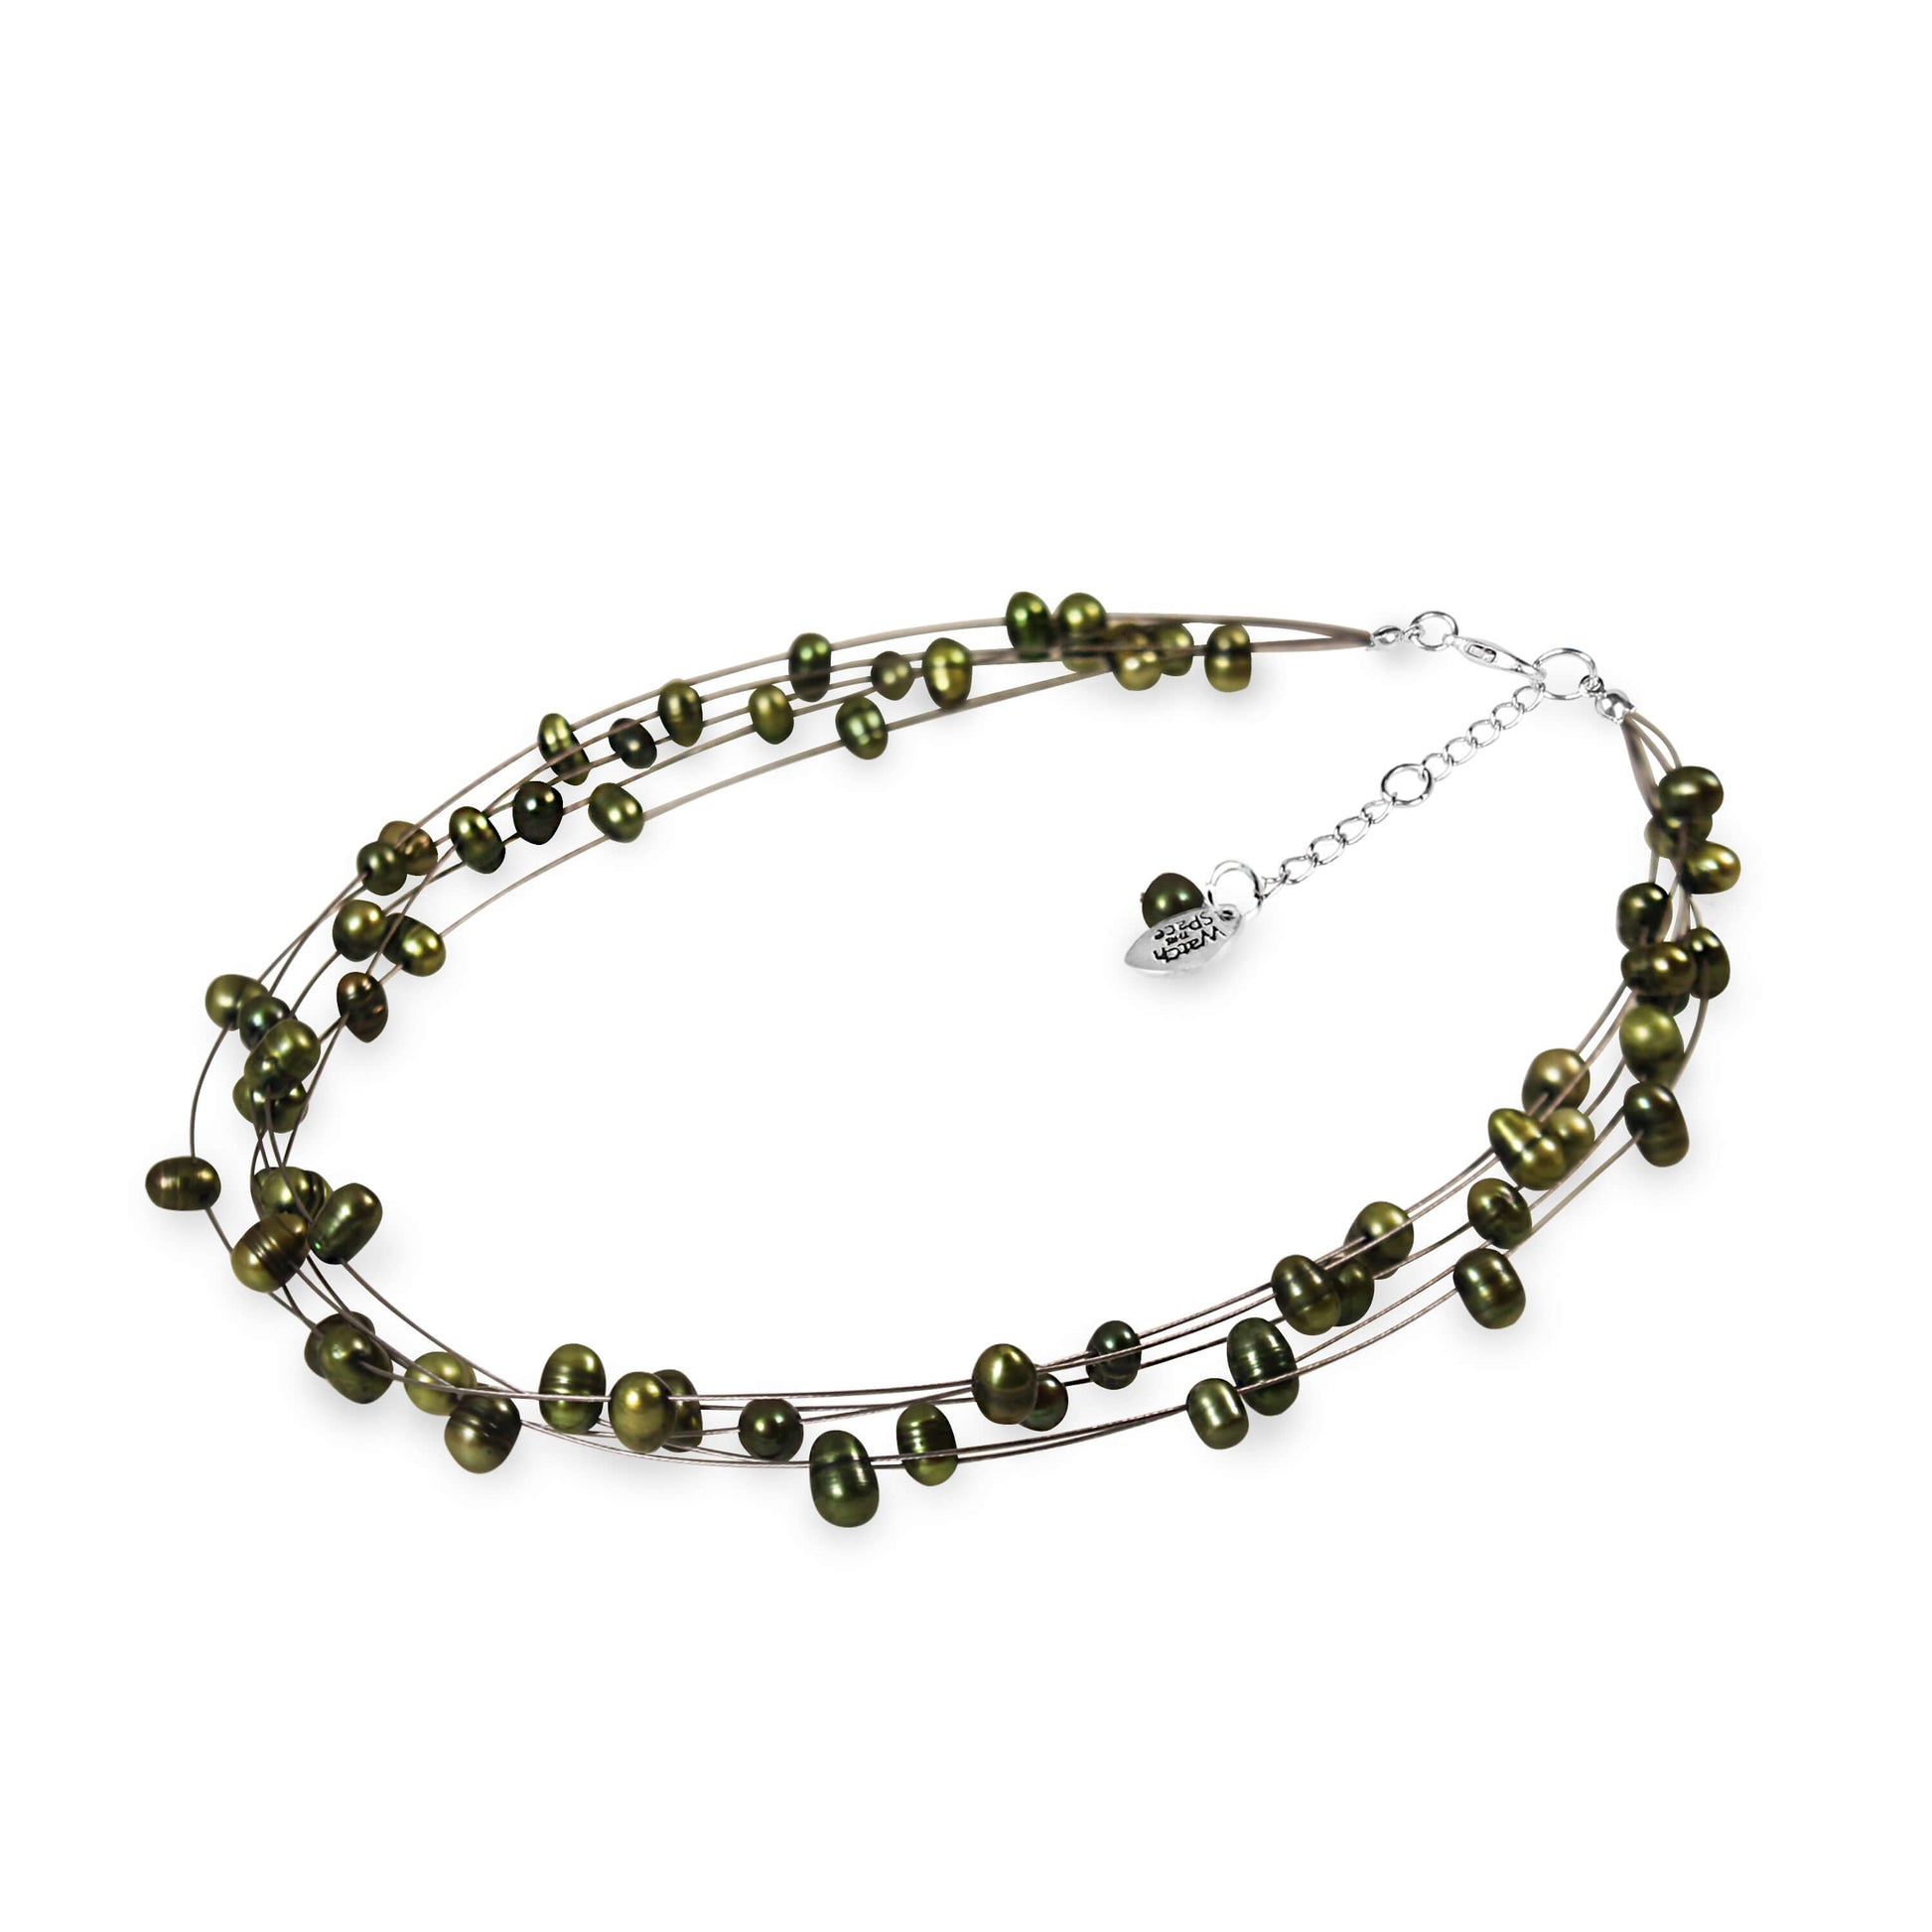 Olive Freshwater Baroque Nugget Pearl 5 Strand Necklace